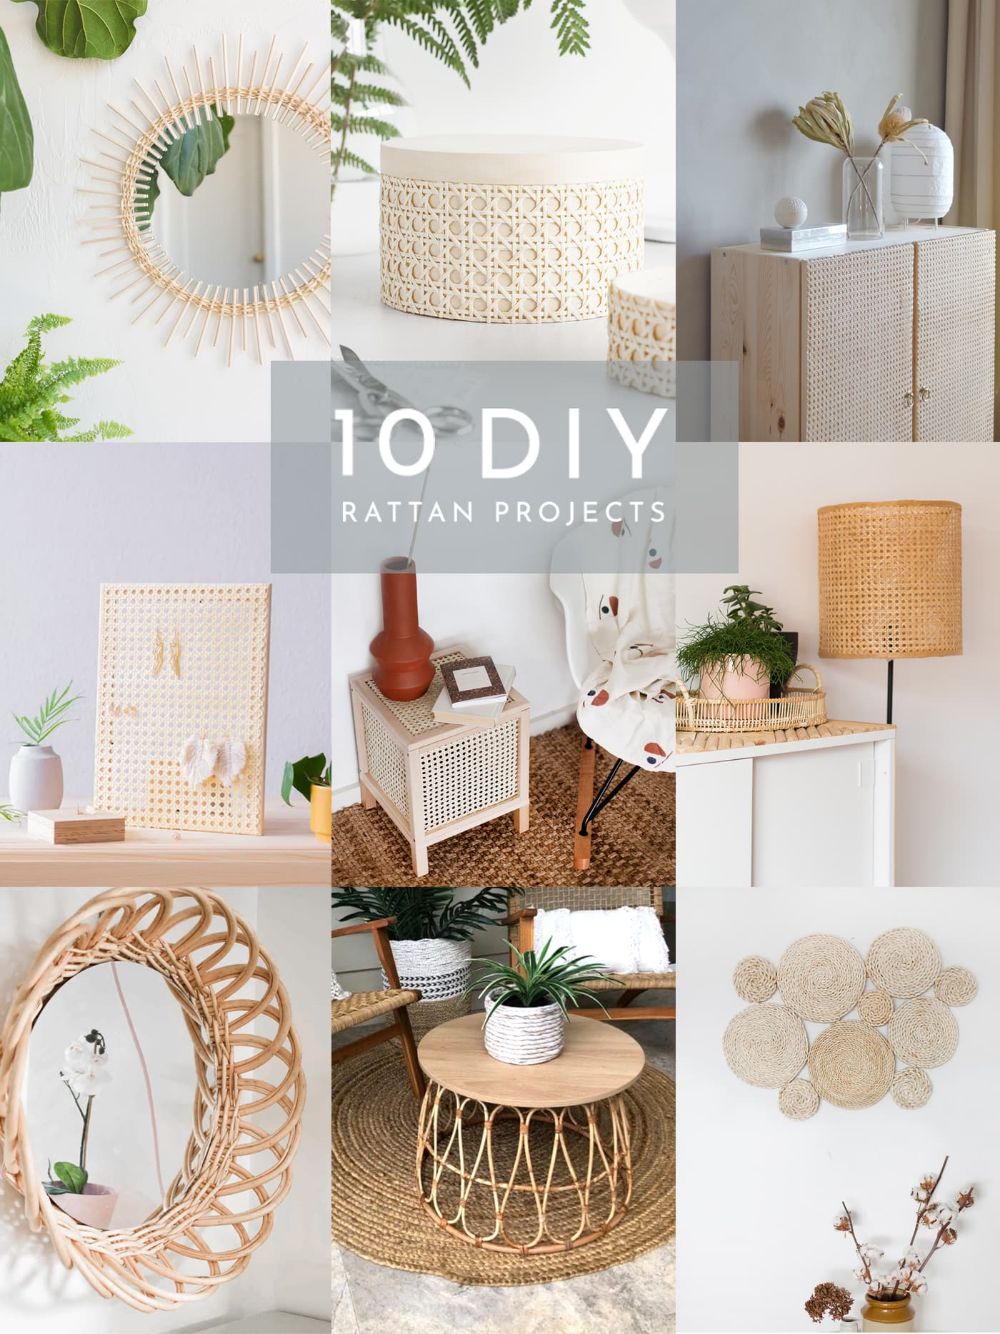 10 DIY Rattan Projects To Try | The Lovely Drawer - 10 DIY Rattan Projects To Try | The Lovely Drawer -   19 diy Decorations maison ideas